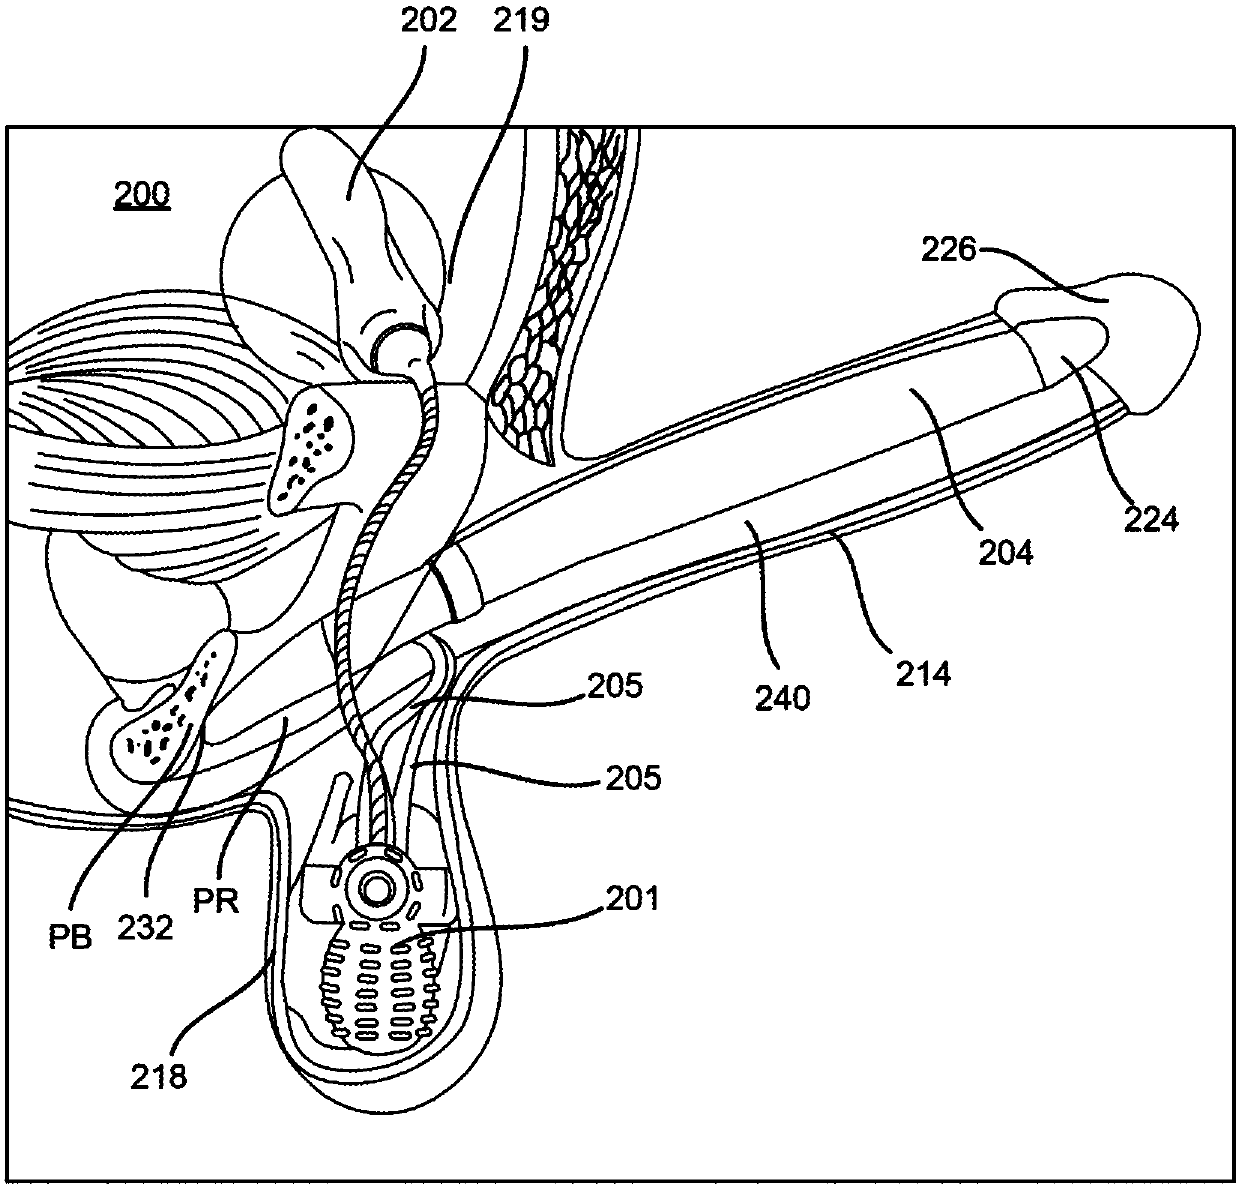 Inflatable penile prosthesis with reversible flow pump